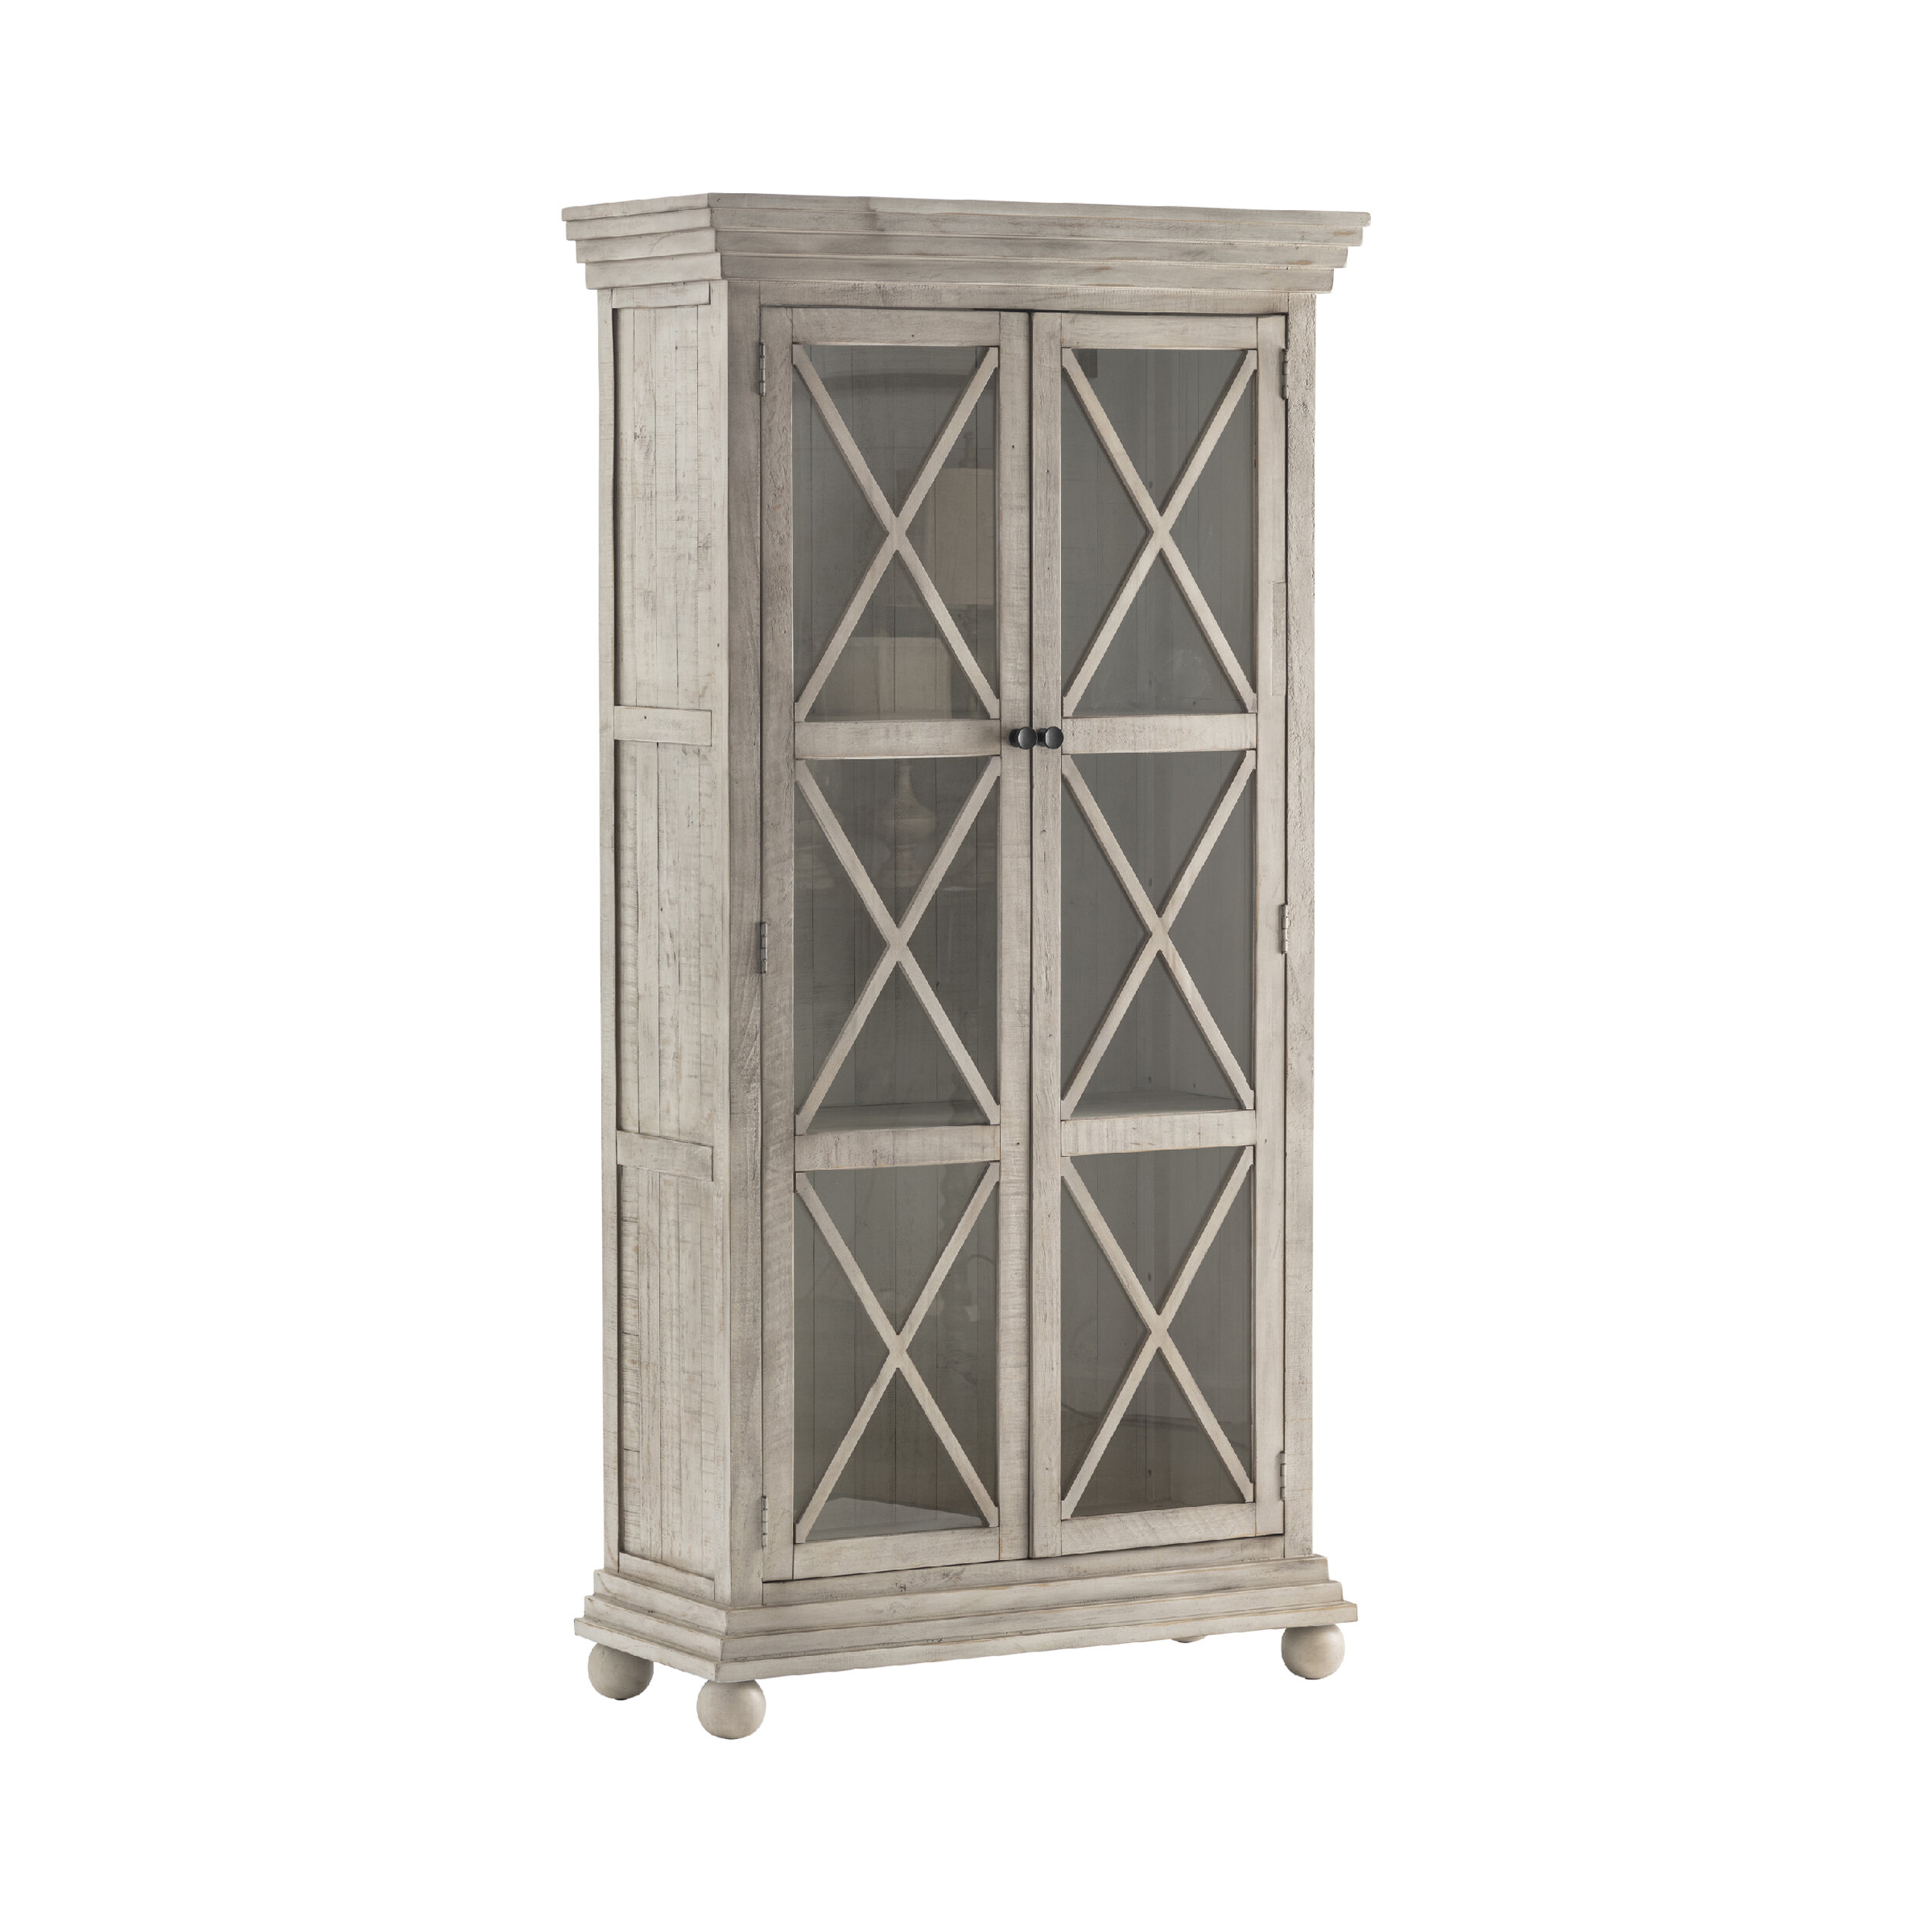 Rosecliff Heights Topeka Dining Cabinet | Wayfair